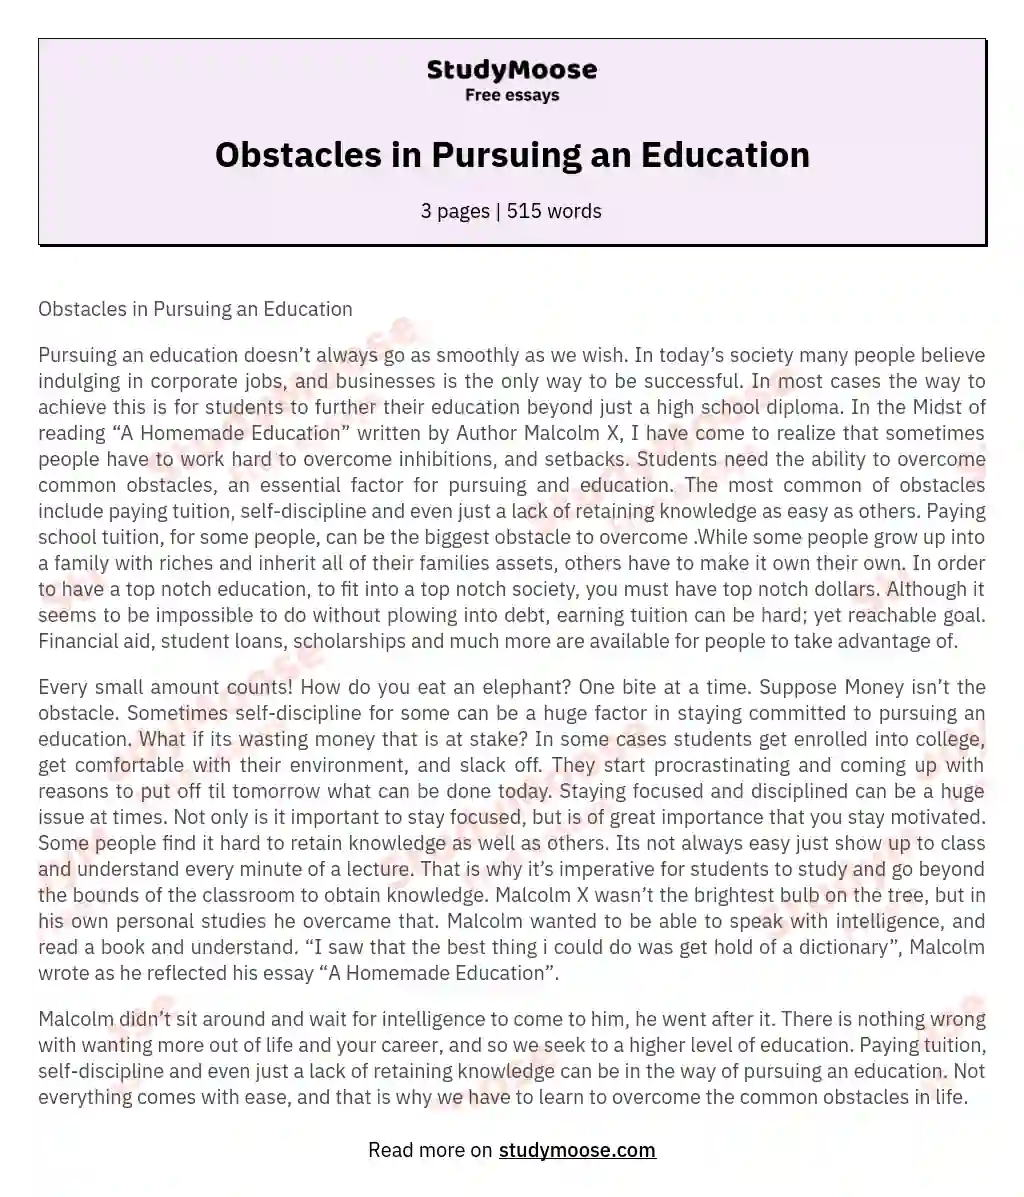 Obstacles in Pursuing an Education essay